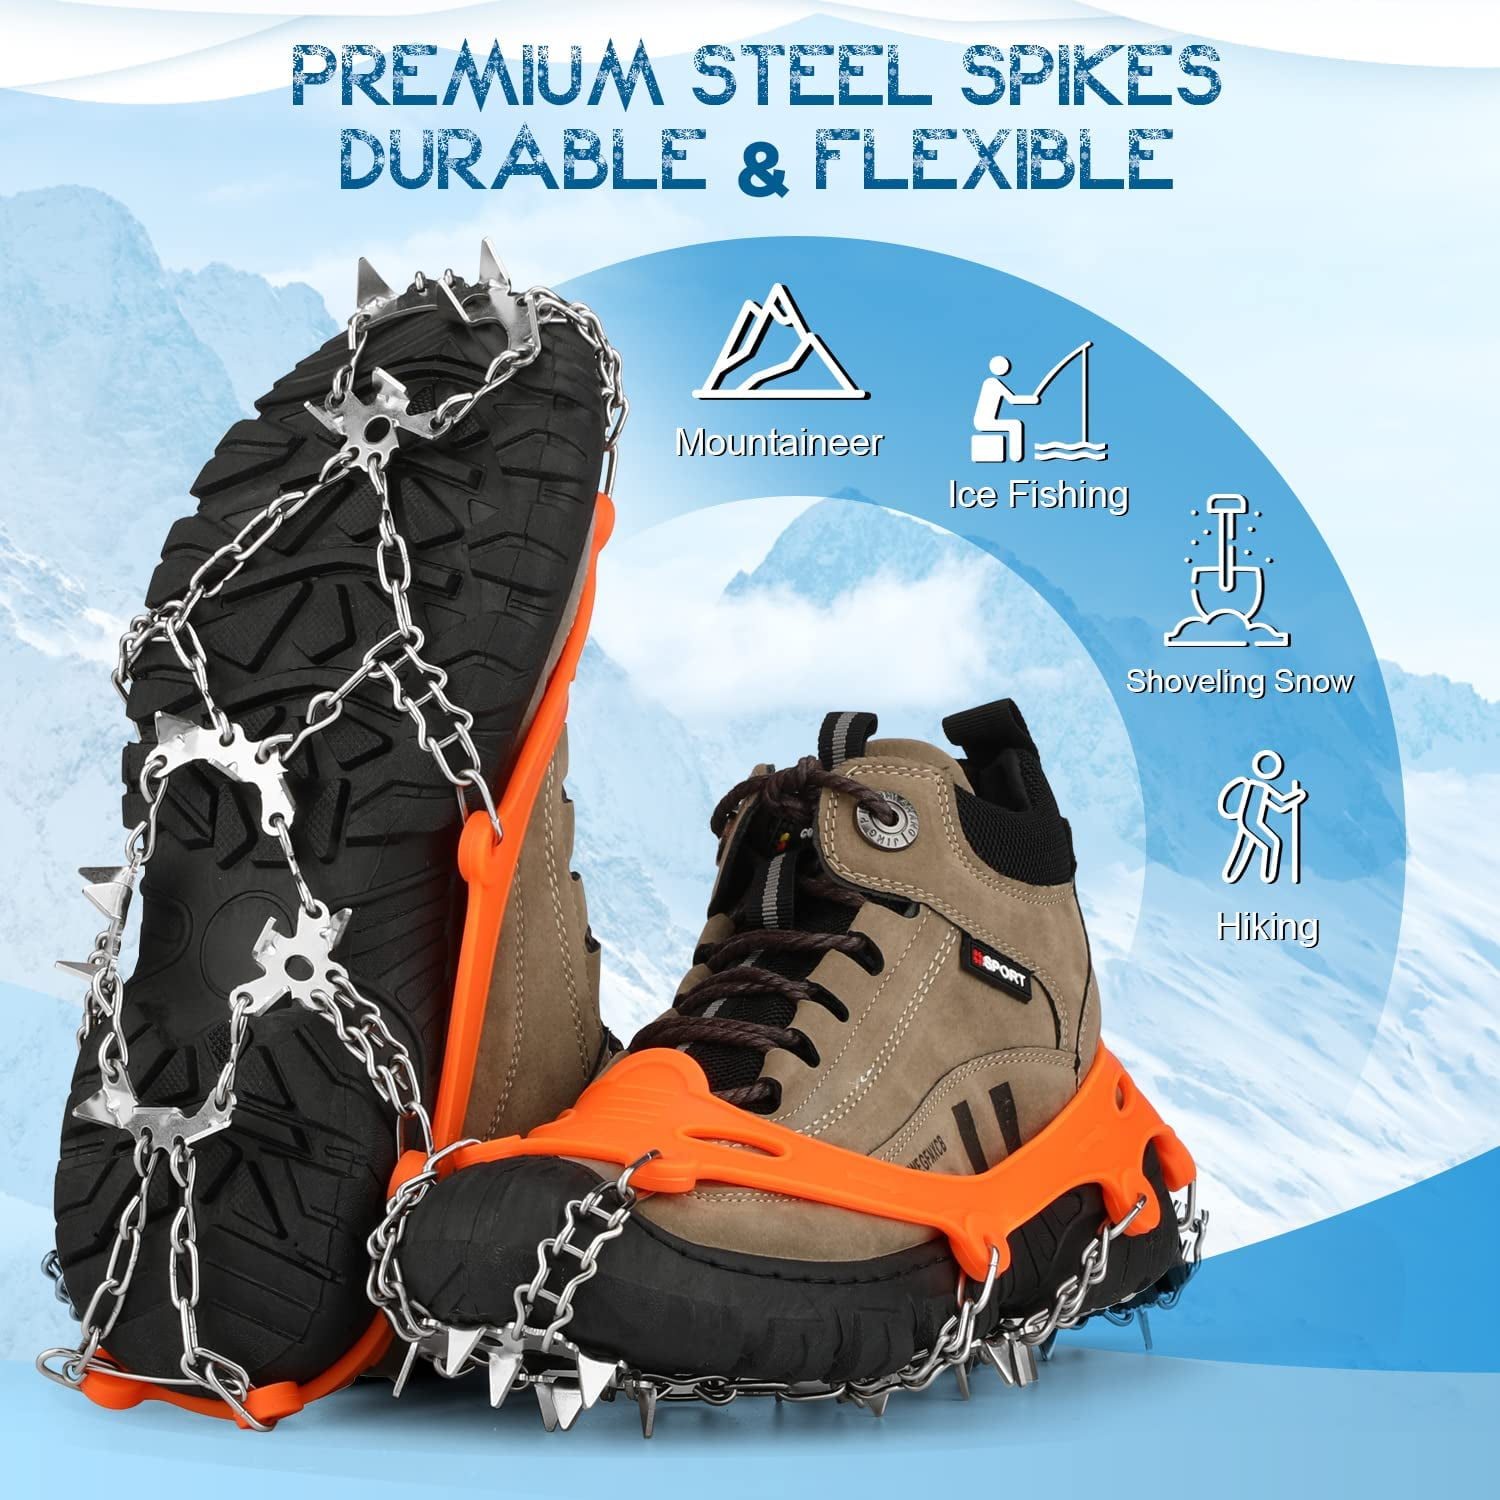 Crampons, 19 Spikes Ice Cleats Traction Snow Grips for Hiking Boots, Shoes  Women Men Kids, Safe Protect for Hiking Fishing Climbing Mountaineering 